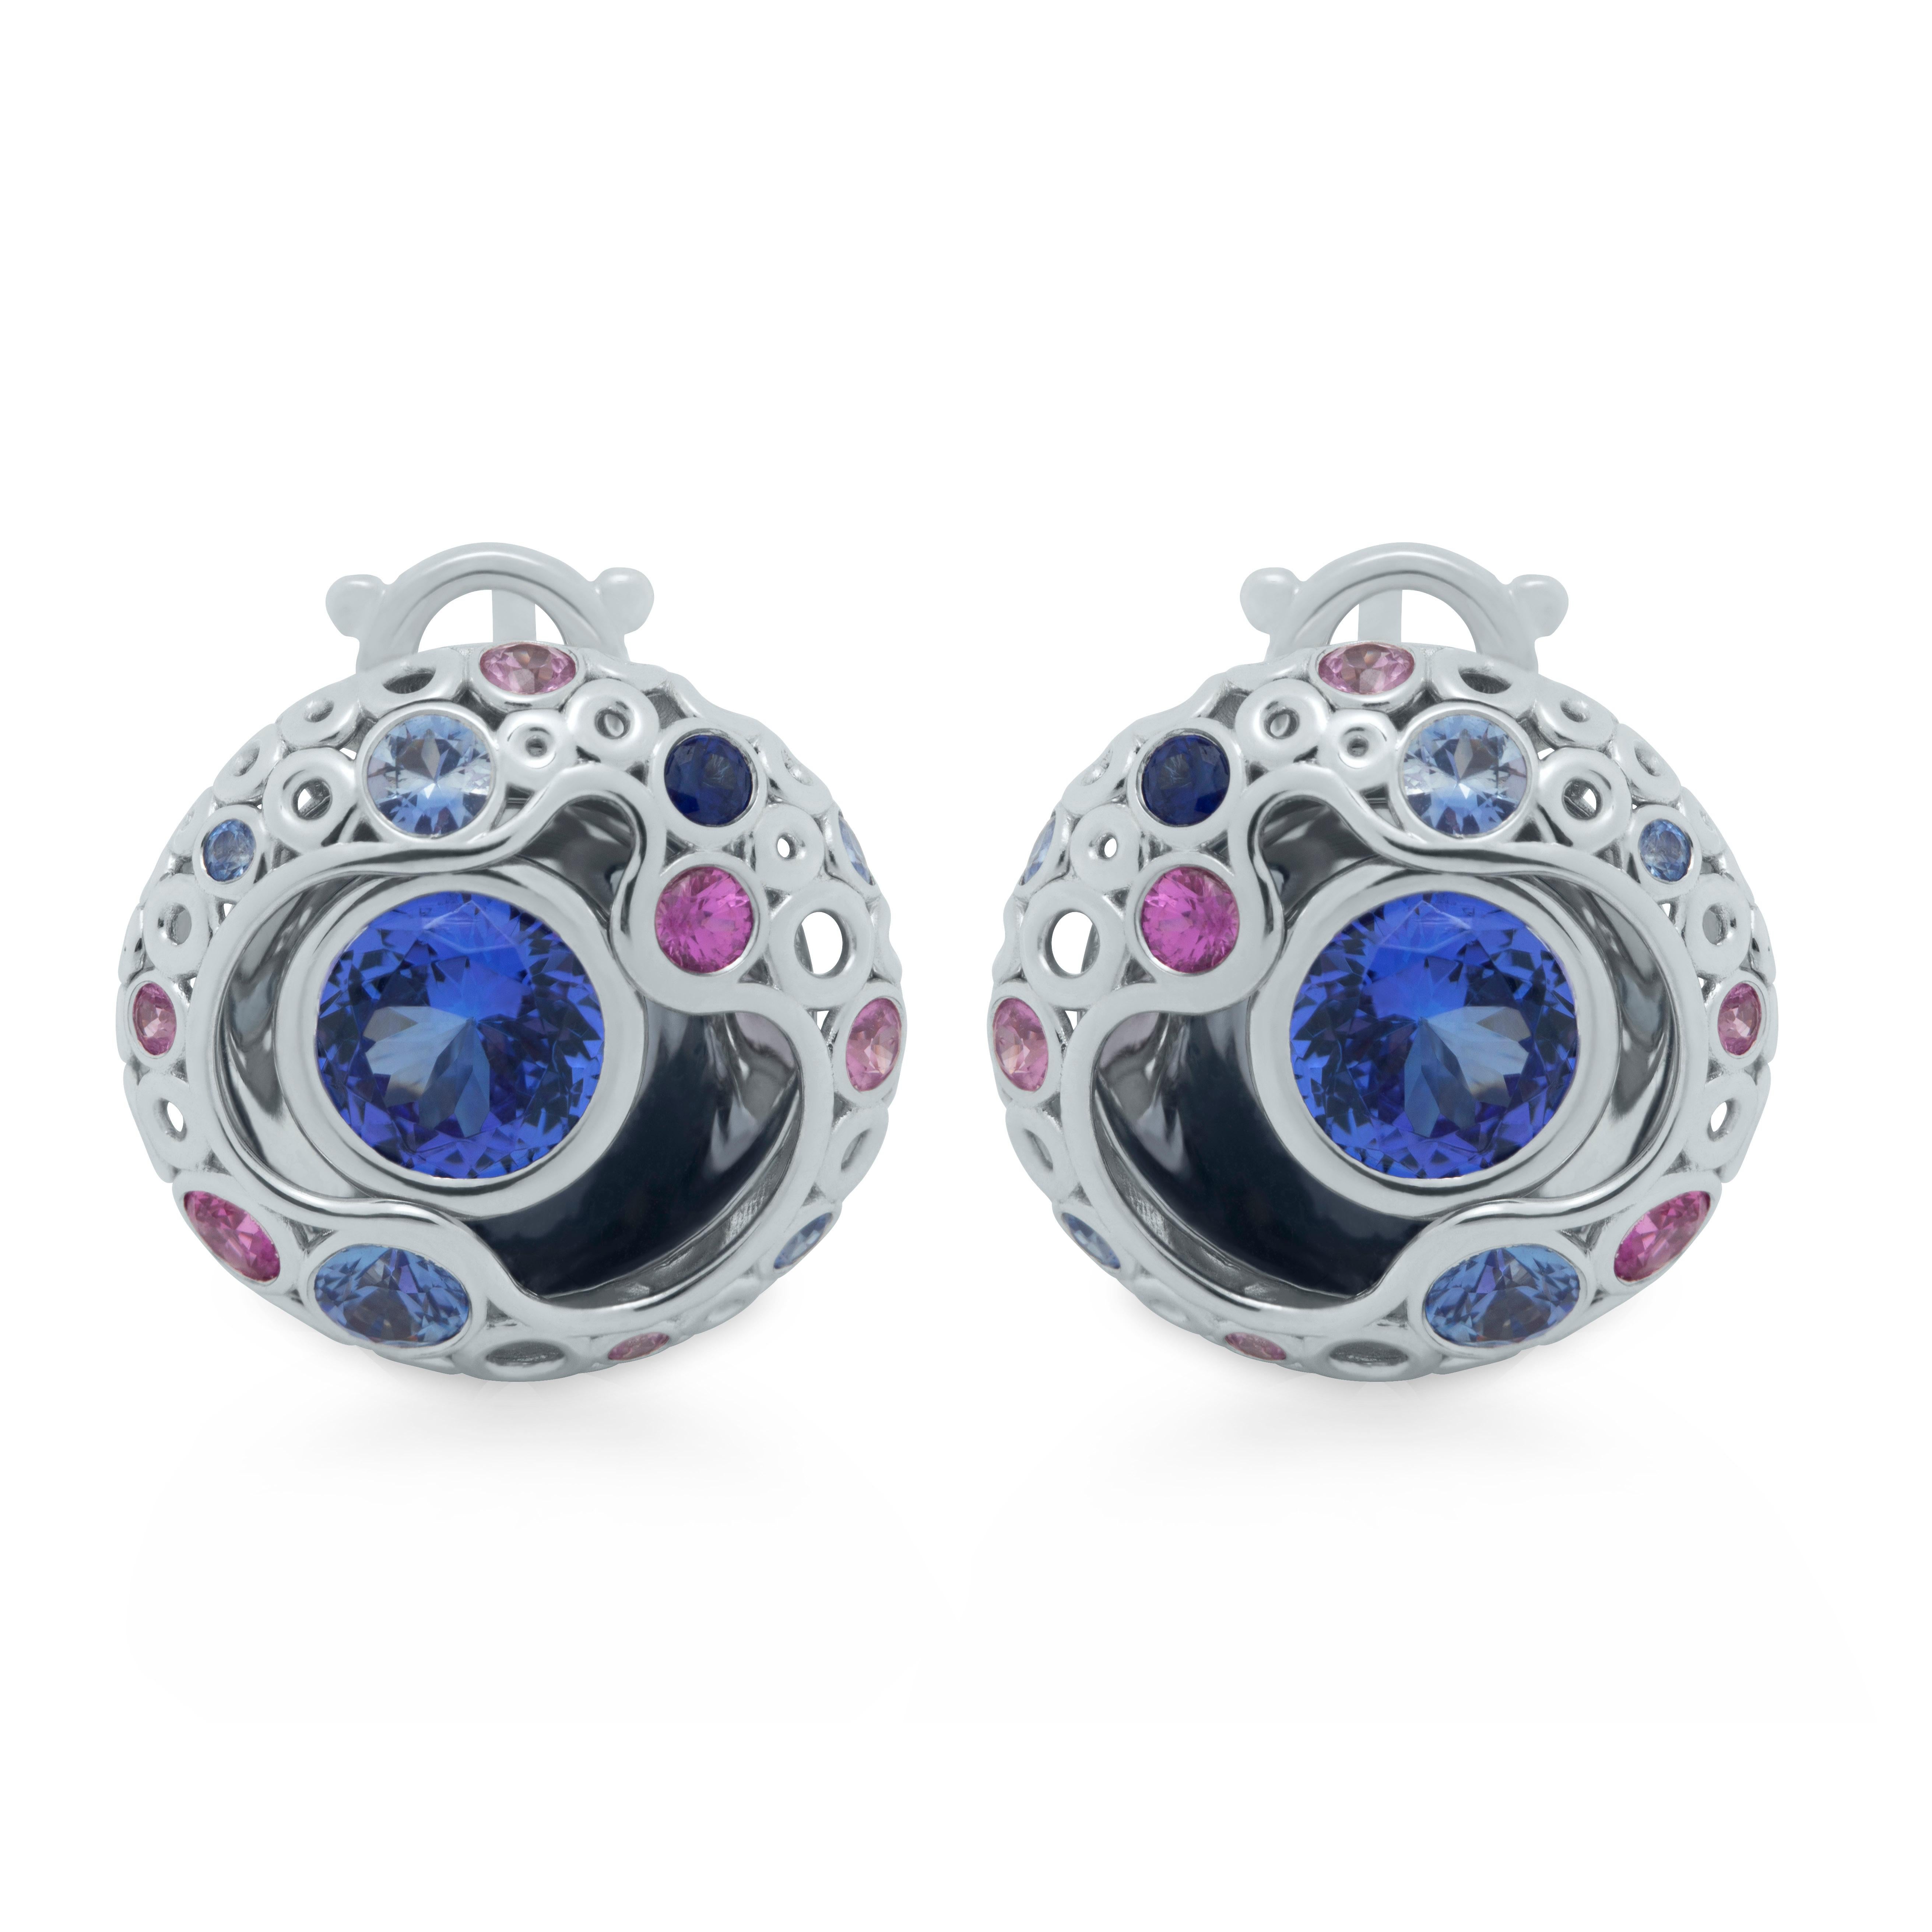 Tanzanite 2.82 Carat Pink Blue Sapphires 18 Karat White Gold Bubble Earrings
Incredibly light and airy Earrings from our Bubbles Collection. White 18 Karat Gold is made in the form of variety of small bubbles, some of which have 16 Pink and 12 Blue